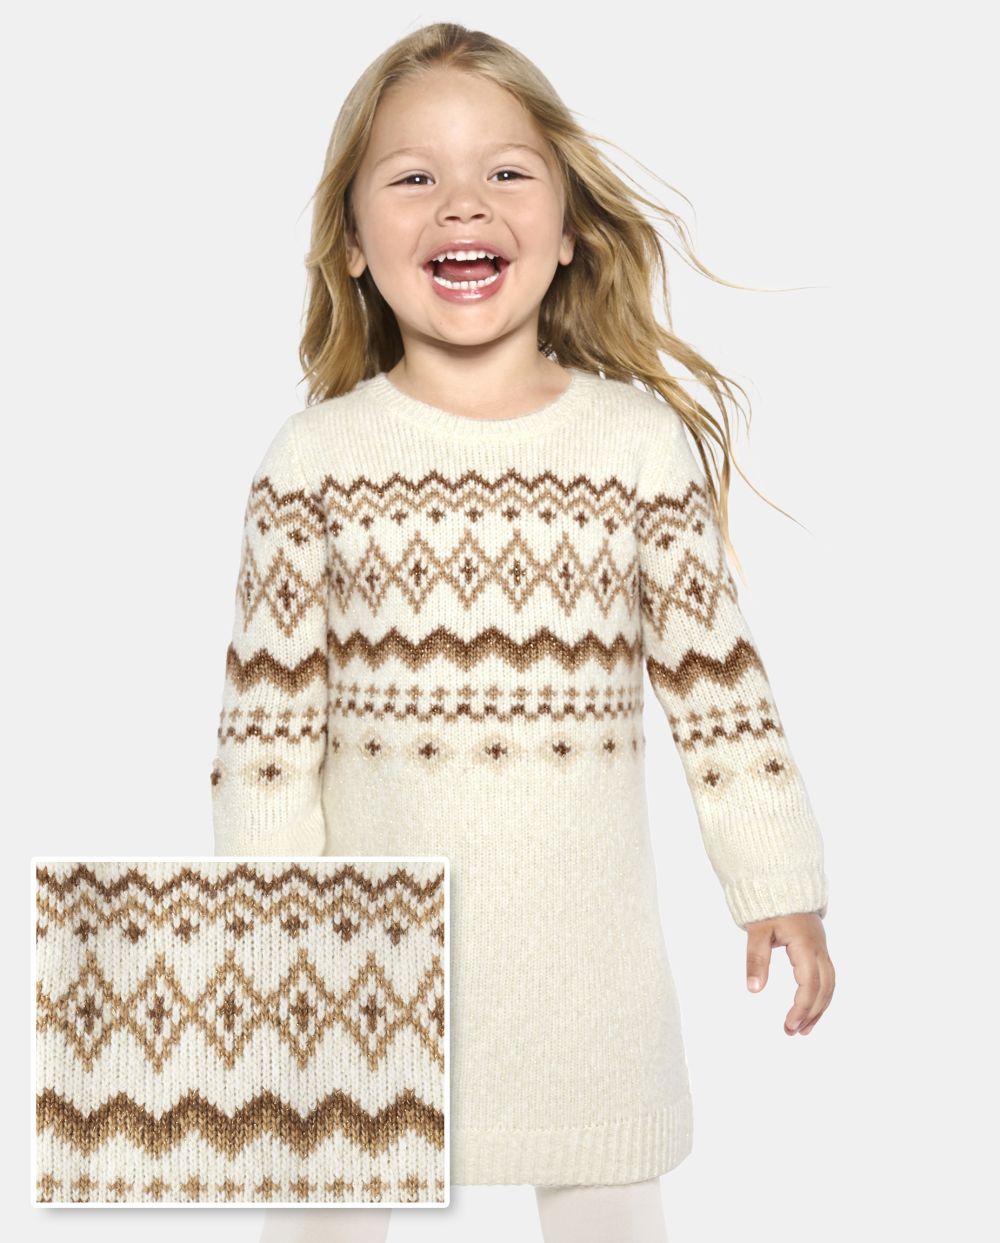 Tall Toddler Baby Sweater Long Sleeves Above the Knee Crew Neck Dress